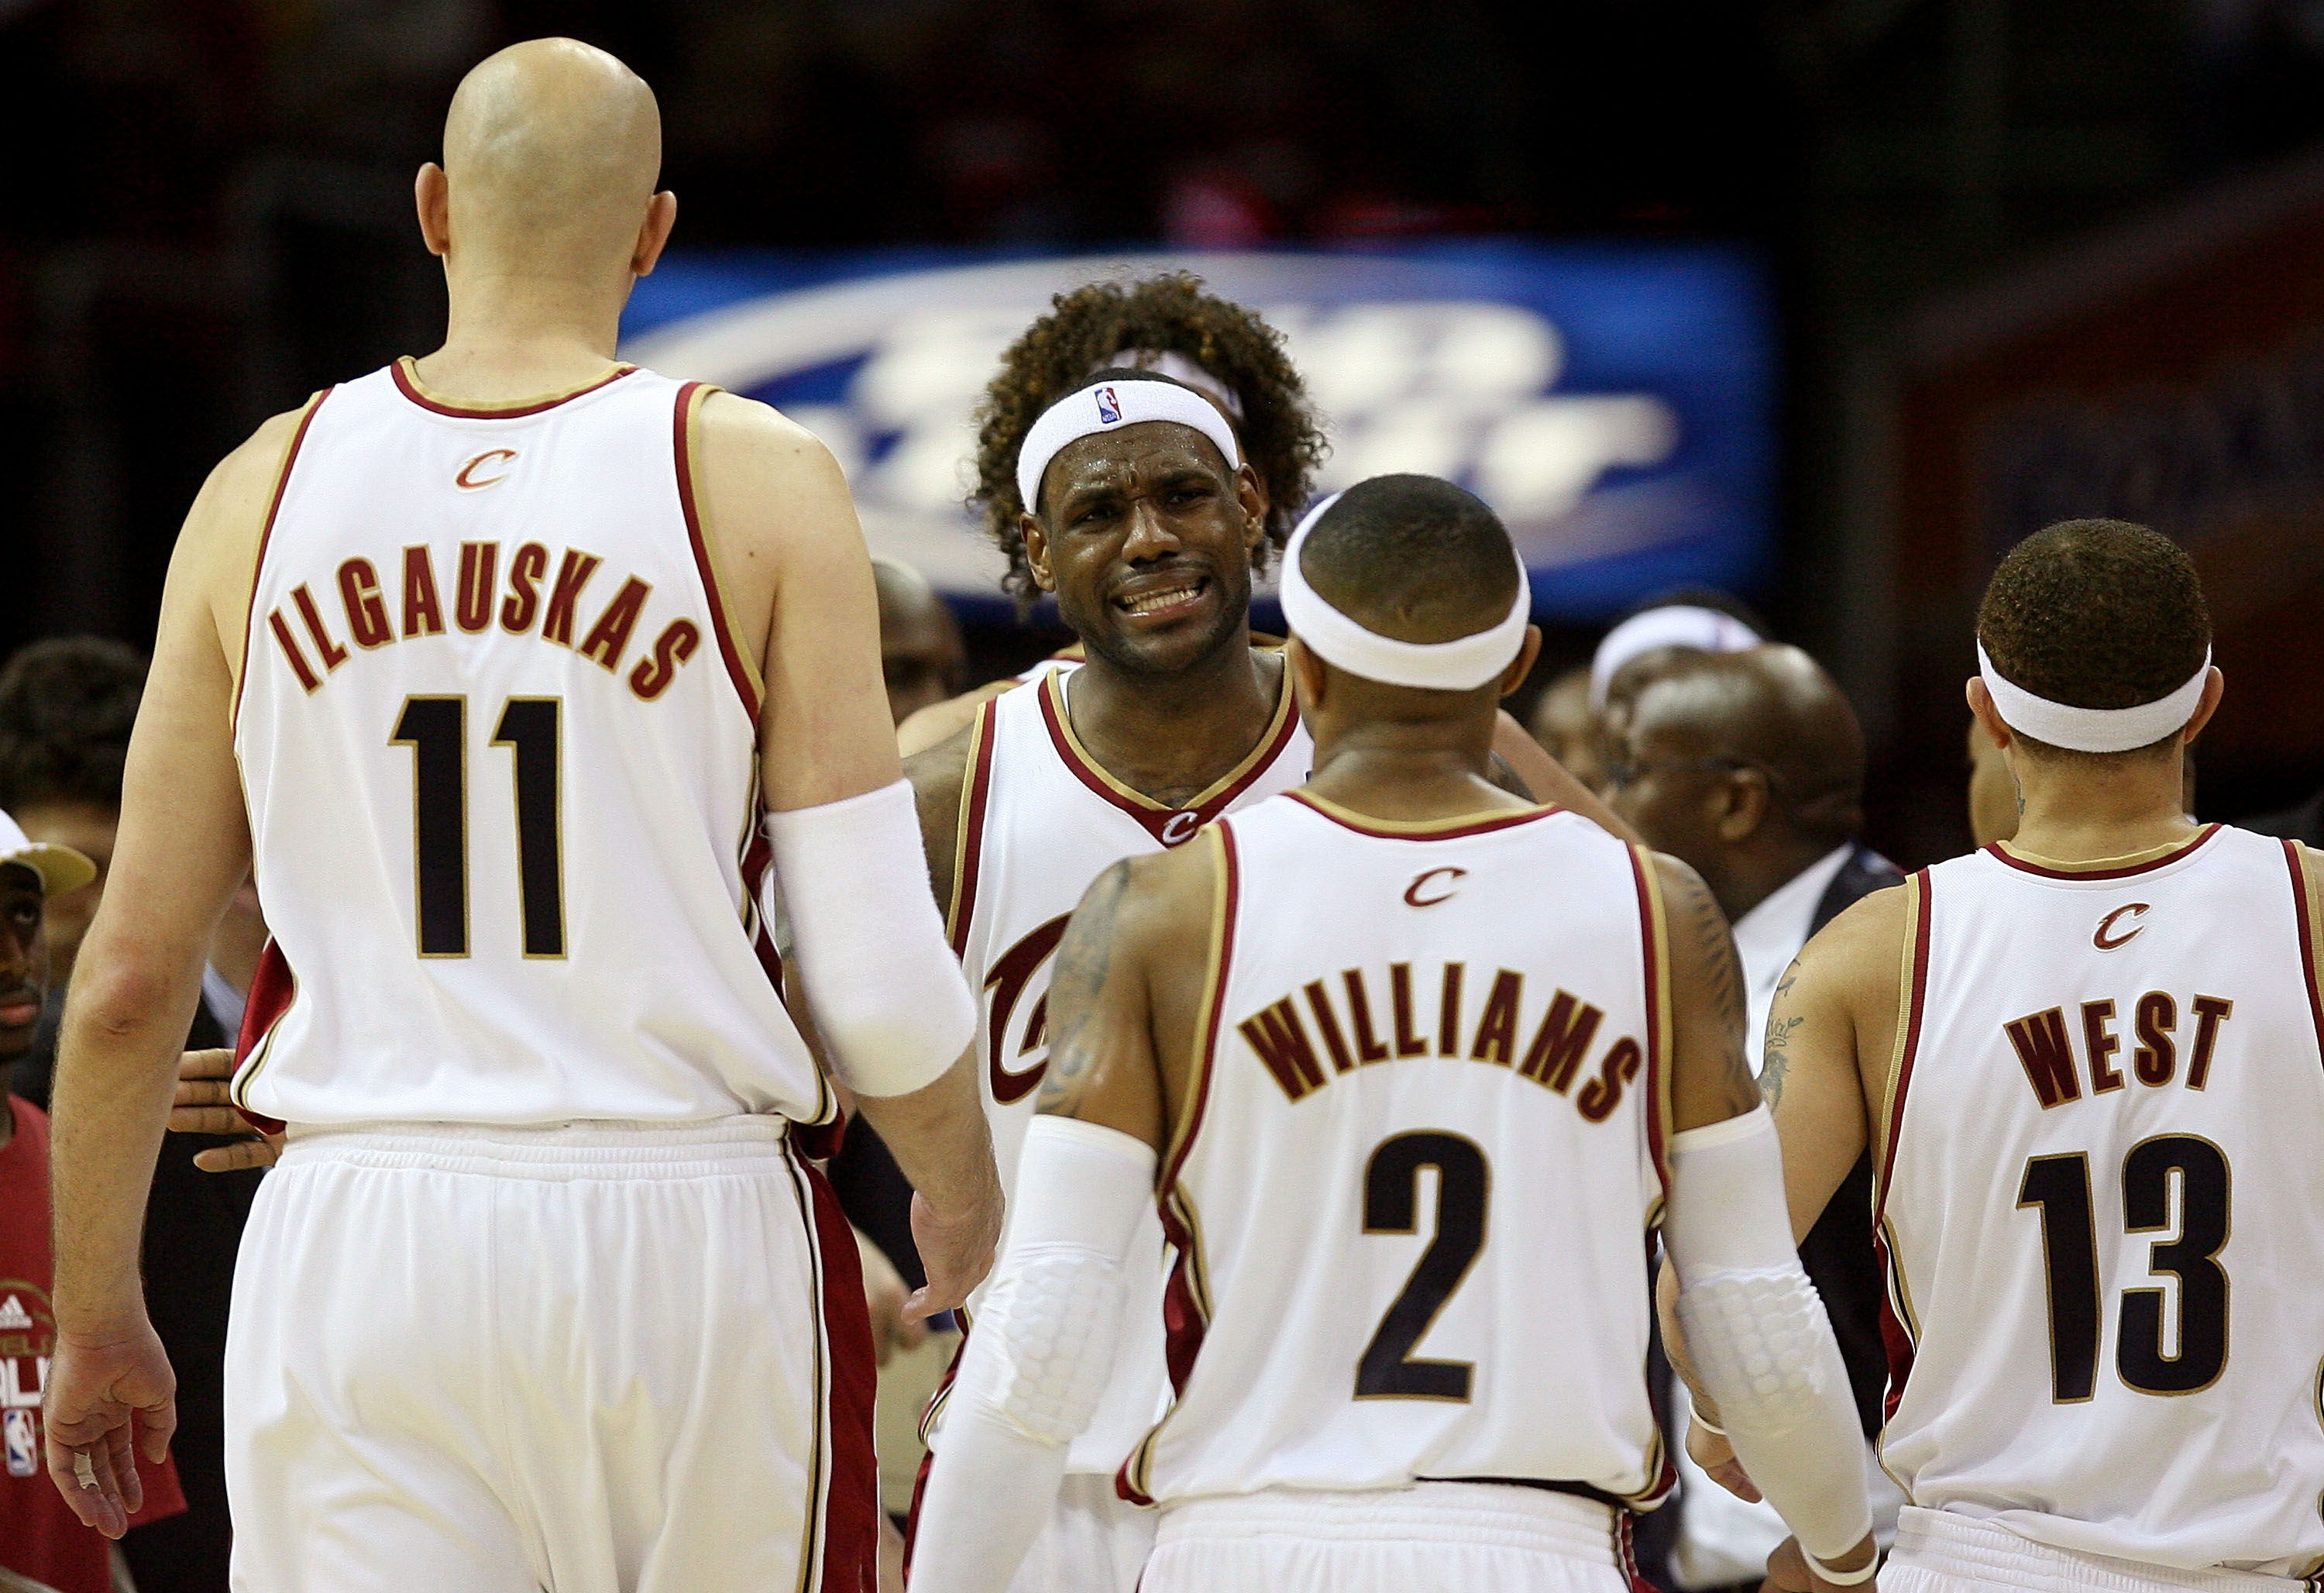 Ranking the Best and Worst Uniforms in Cleveland Cavaliers History